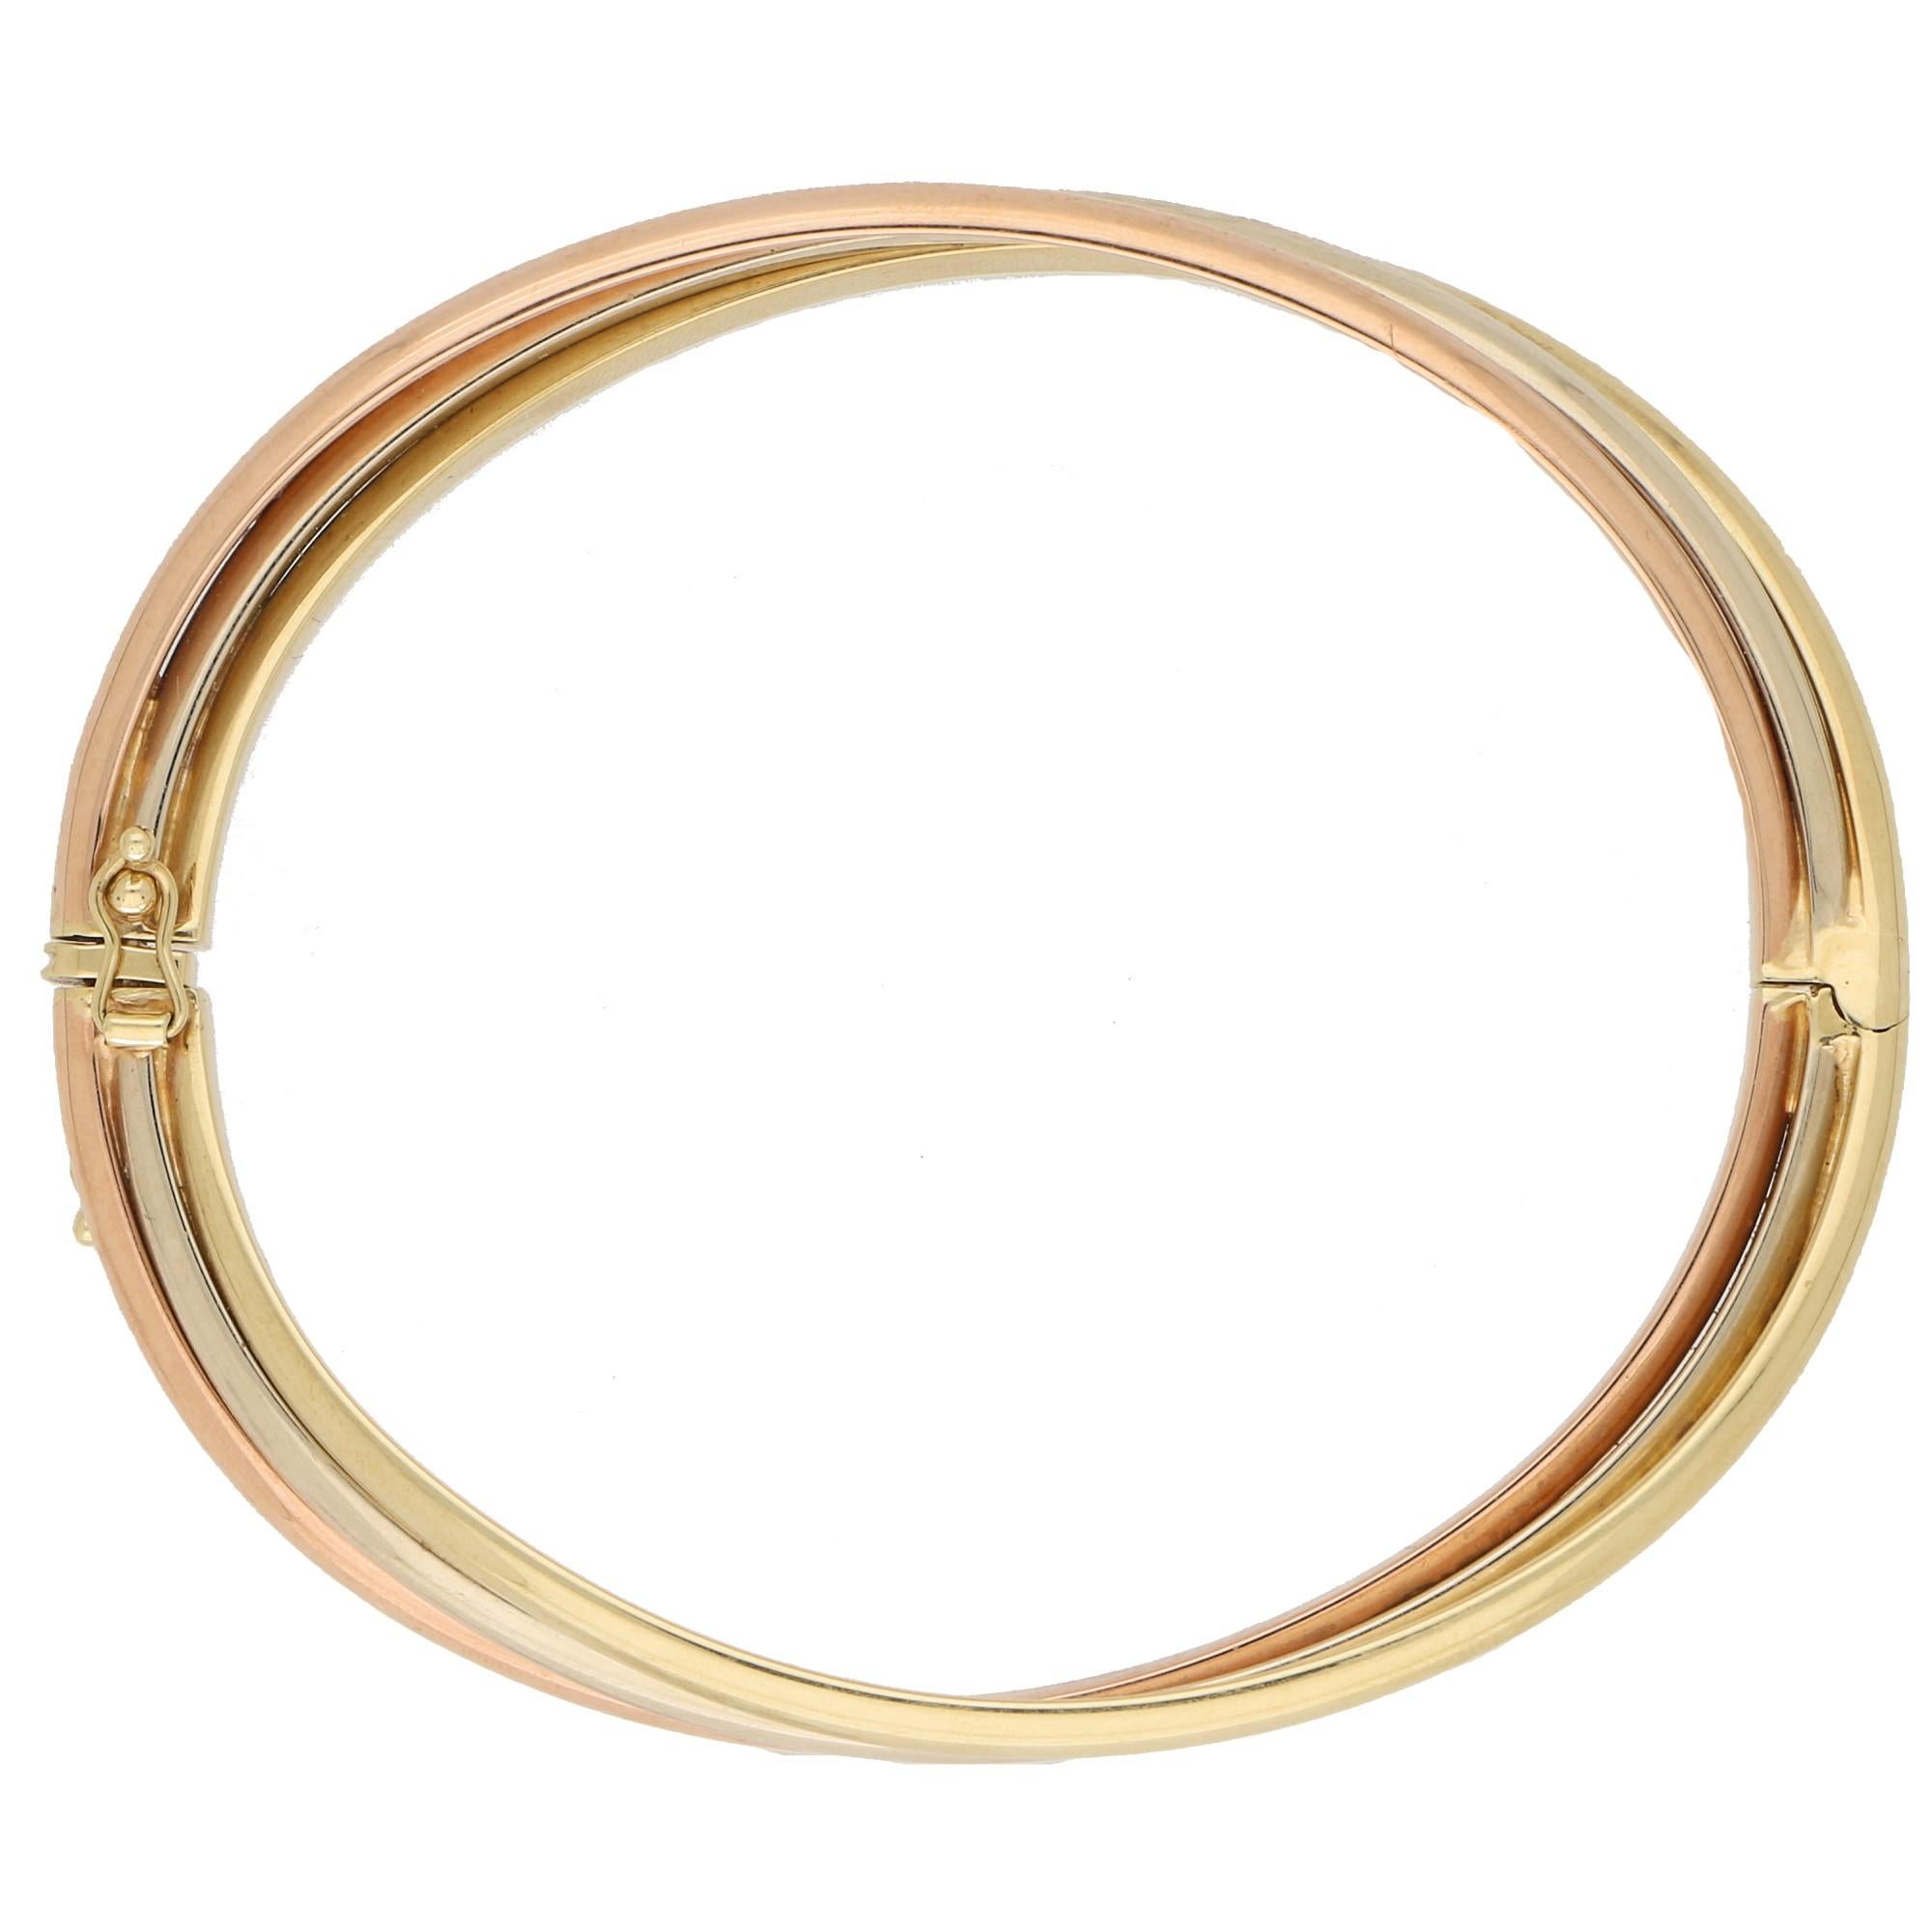 A beautiful hinged trinity bangle set in 9k yellow, rose and white gold. 

The bangle is composed of three soldered tri-colored bangles which are all interlocked together in the iconic trinity design.  If you love the trinity design but aren't so